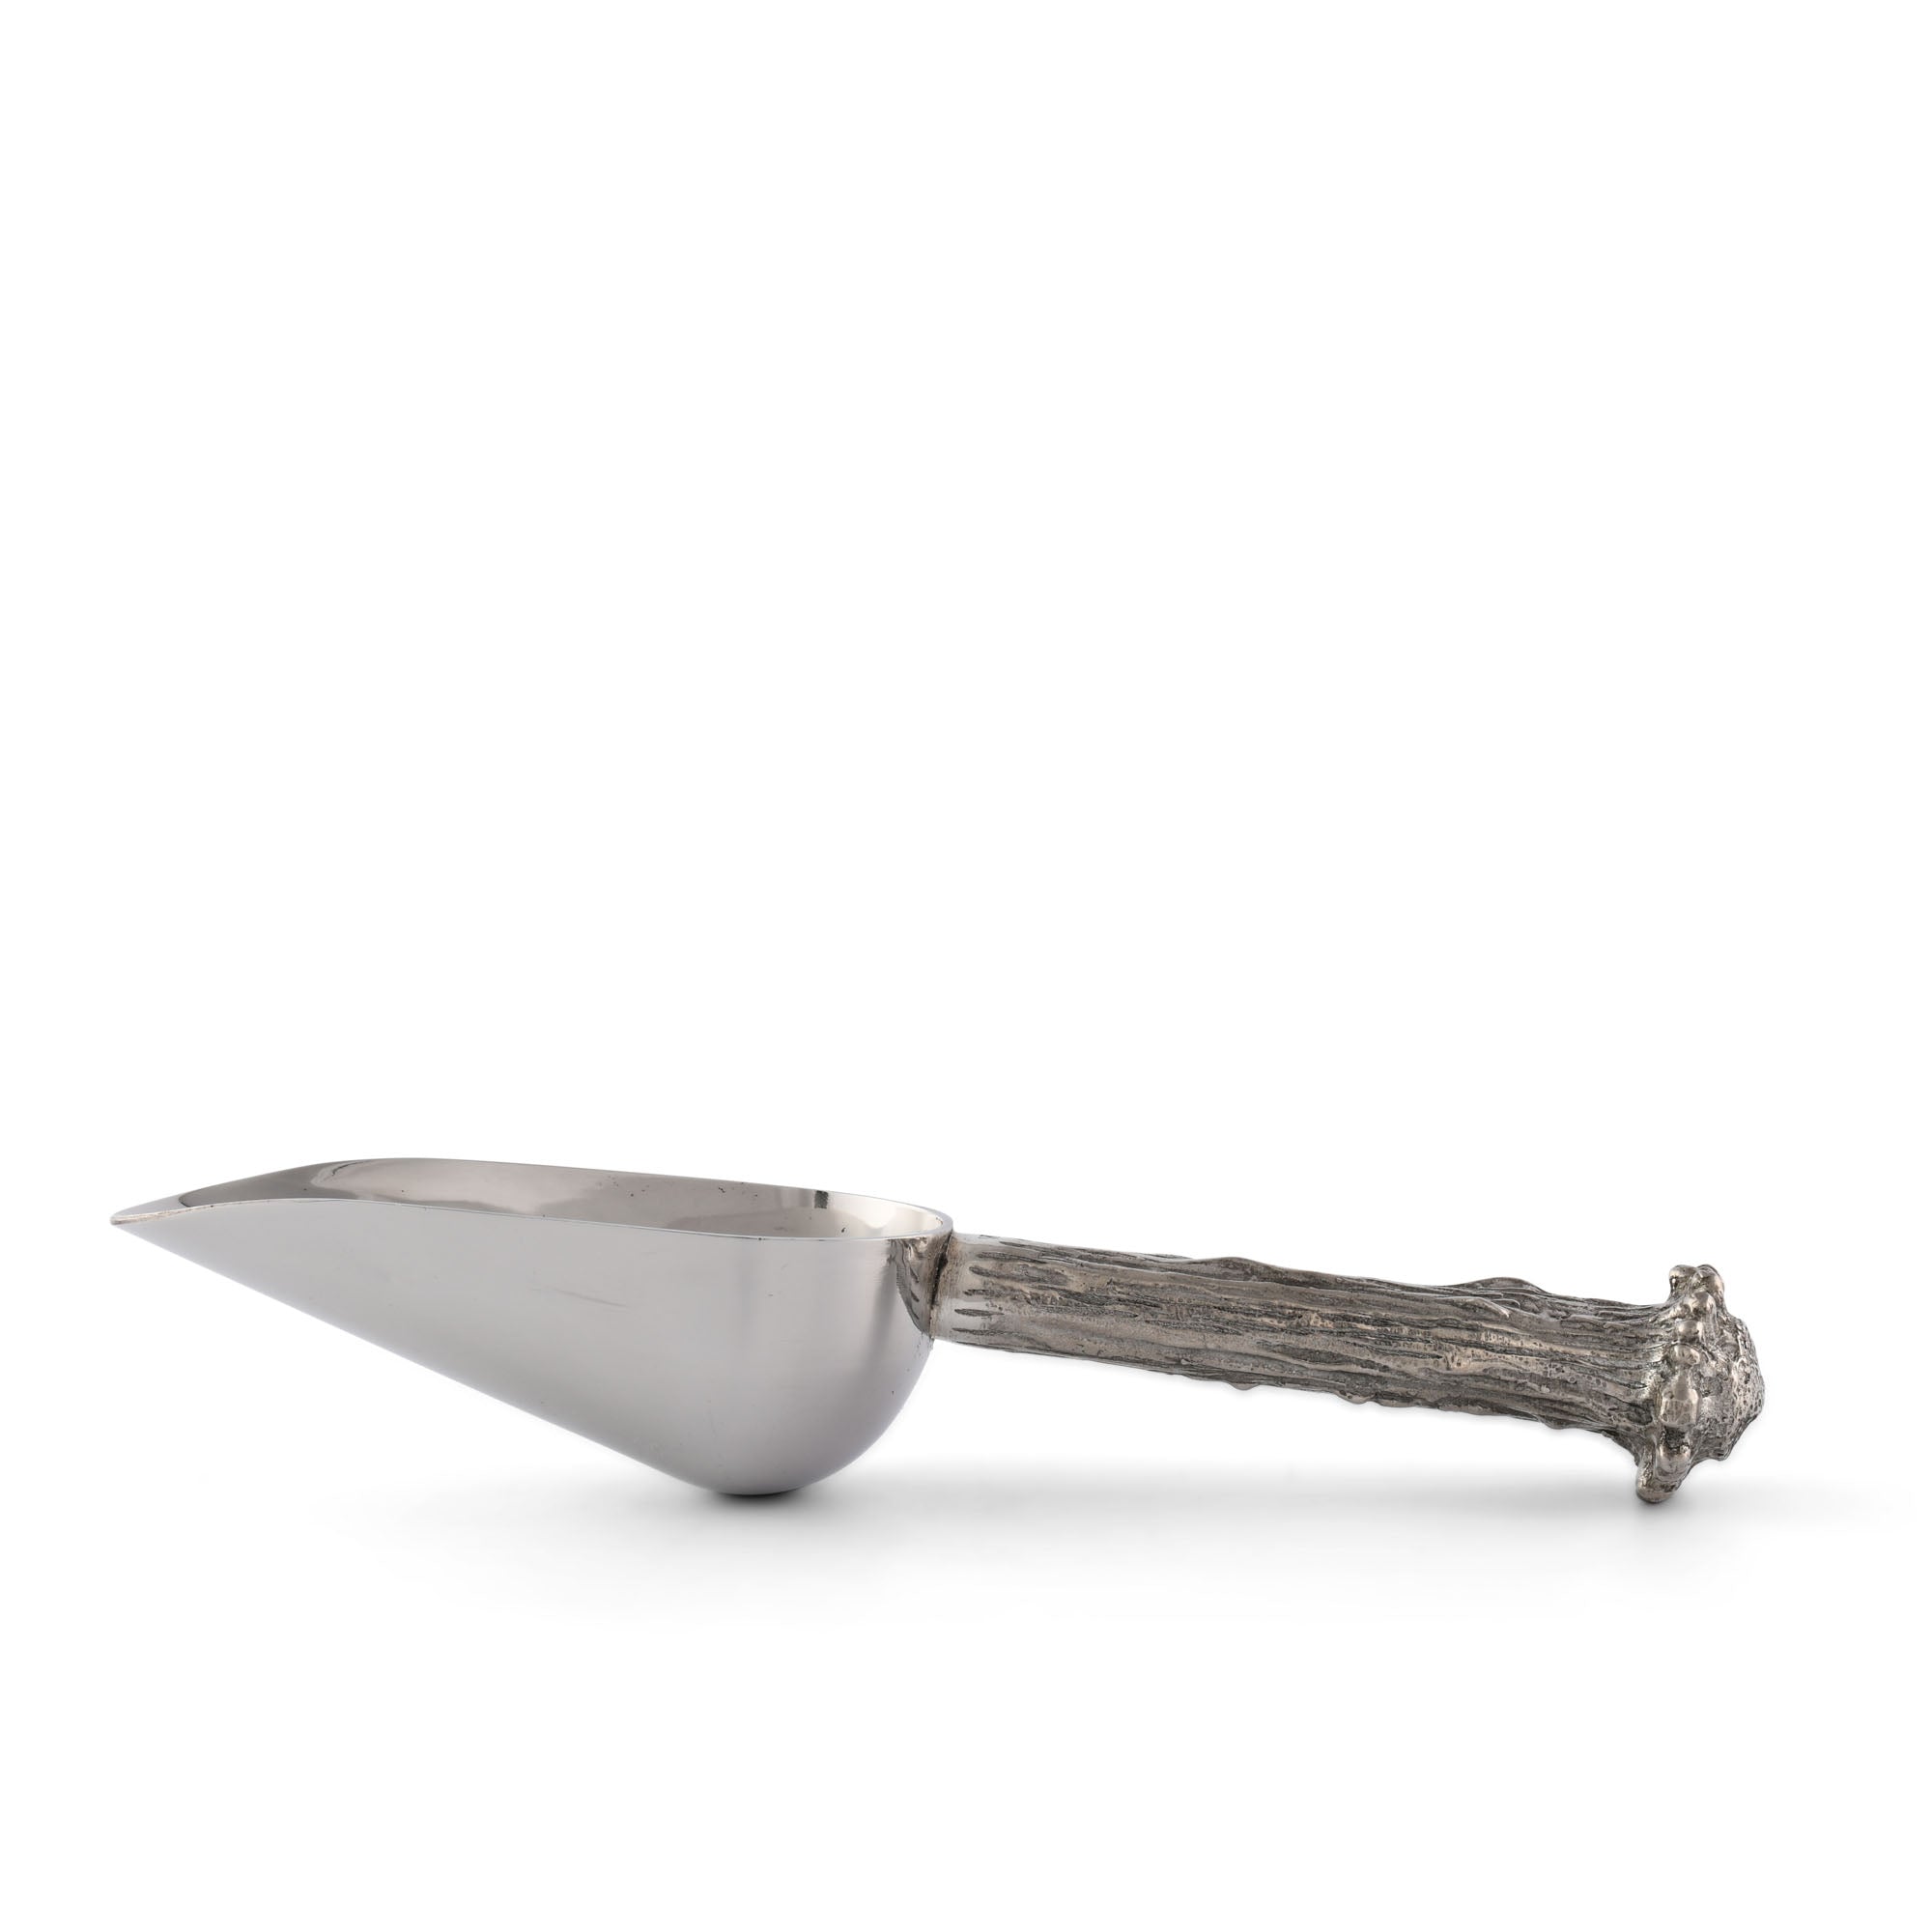 Vagabond House Pewter Antler Ice Scoop Product Image